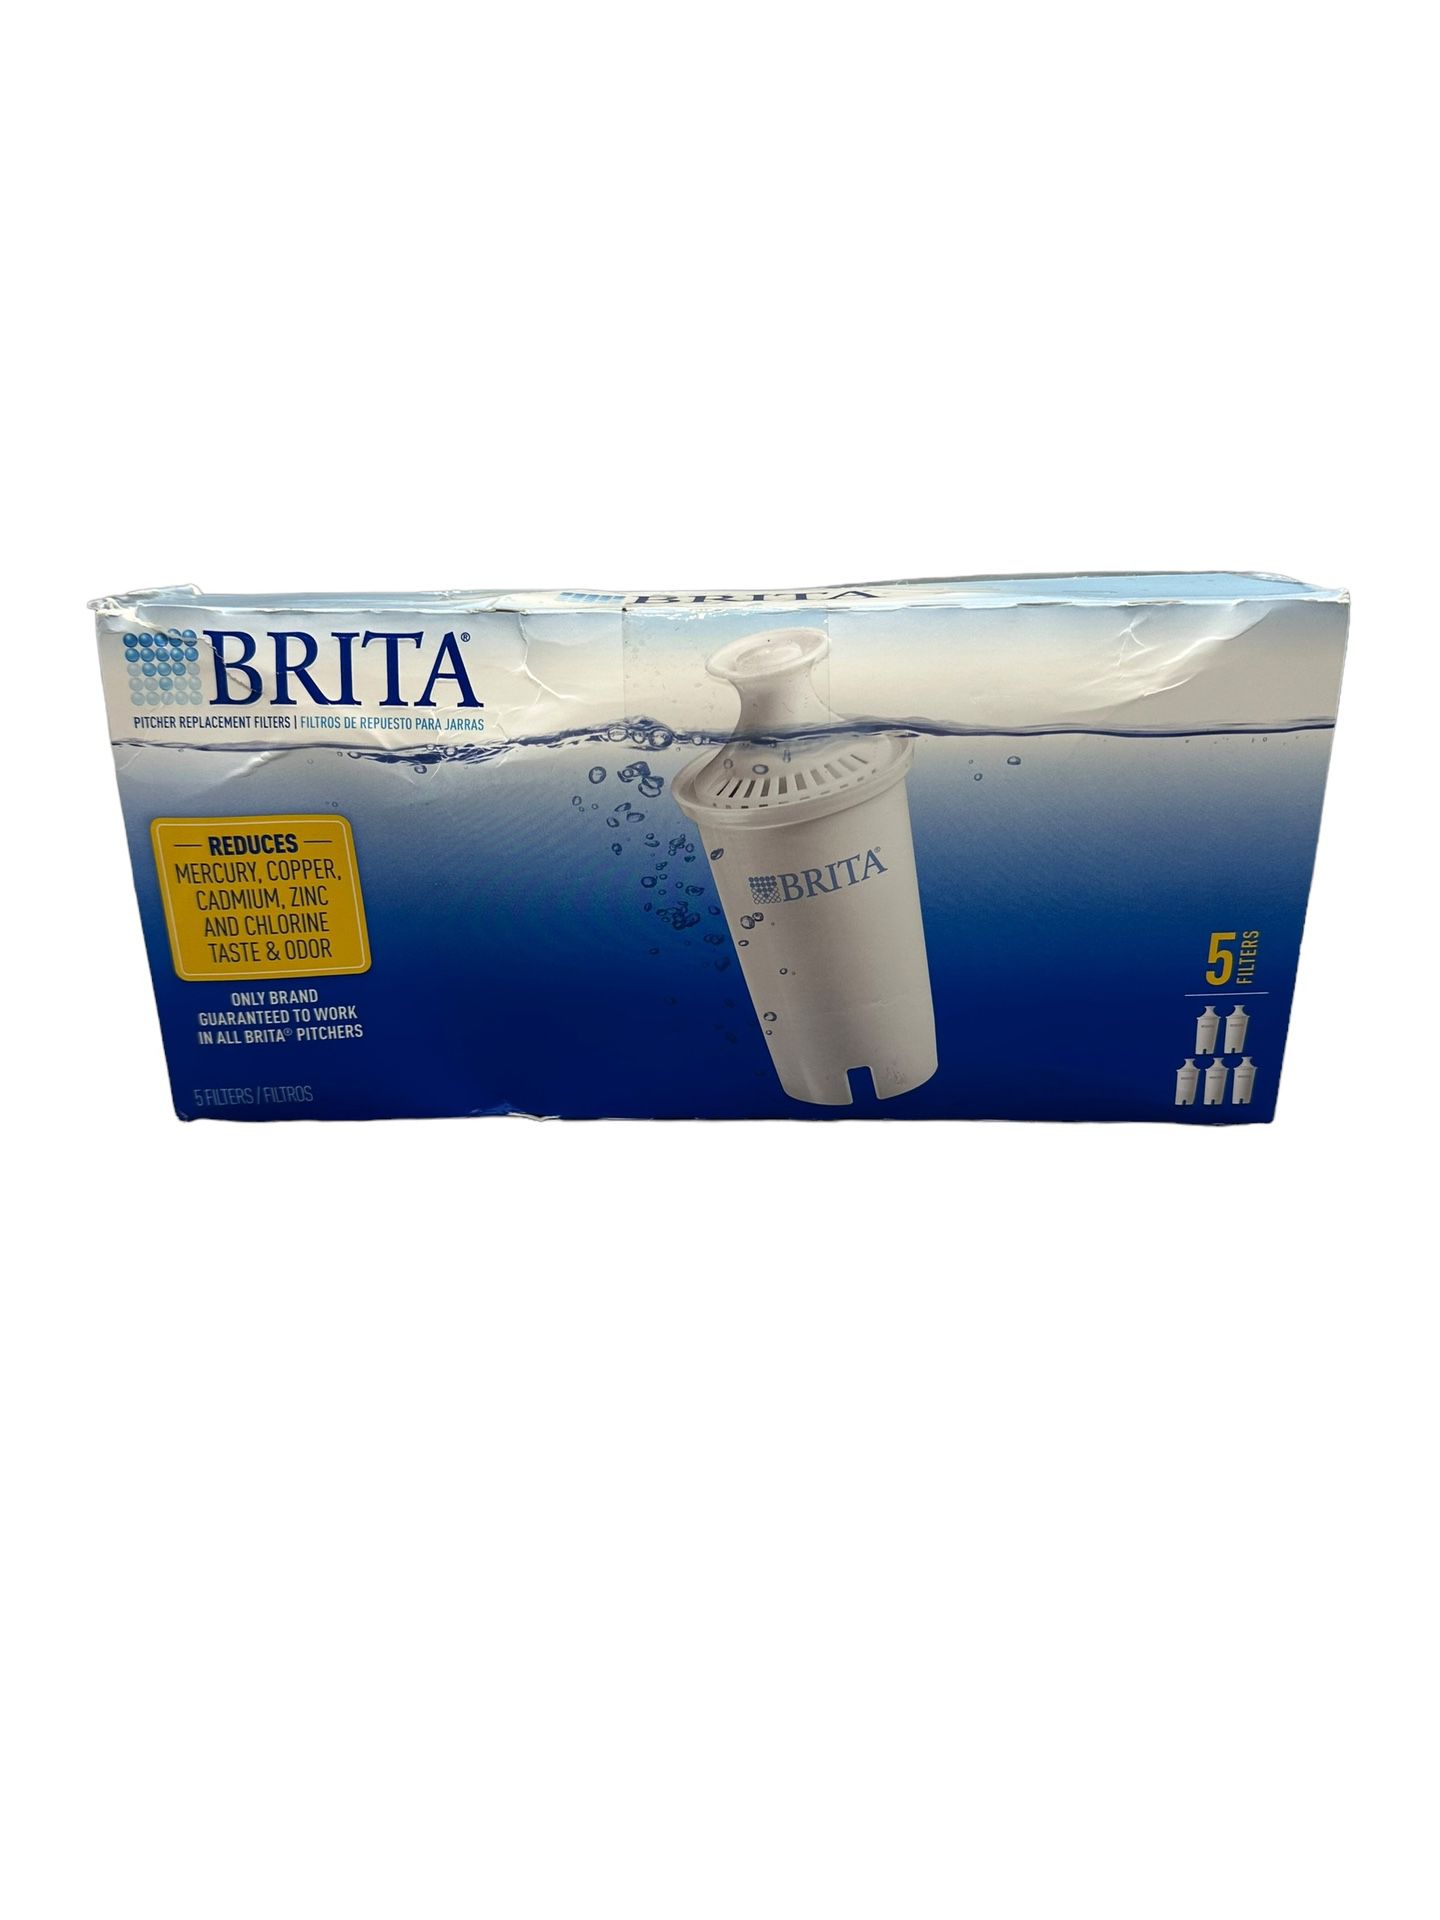 (5 Count Pack) Brita Model OB03 Standard Pitcher Replacement Water Filters NEW!